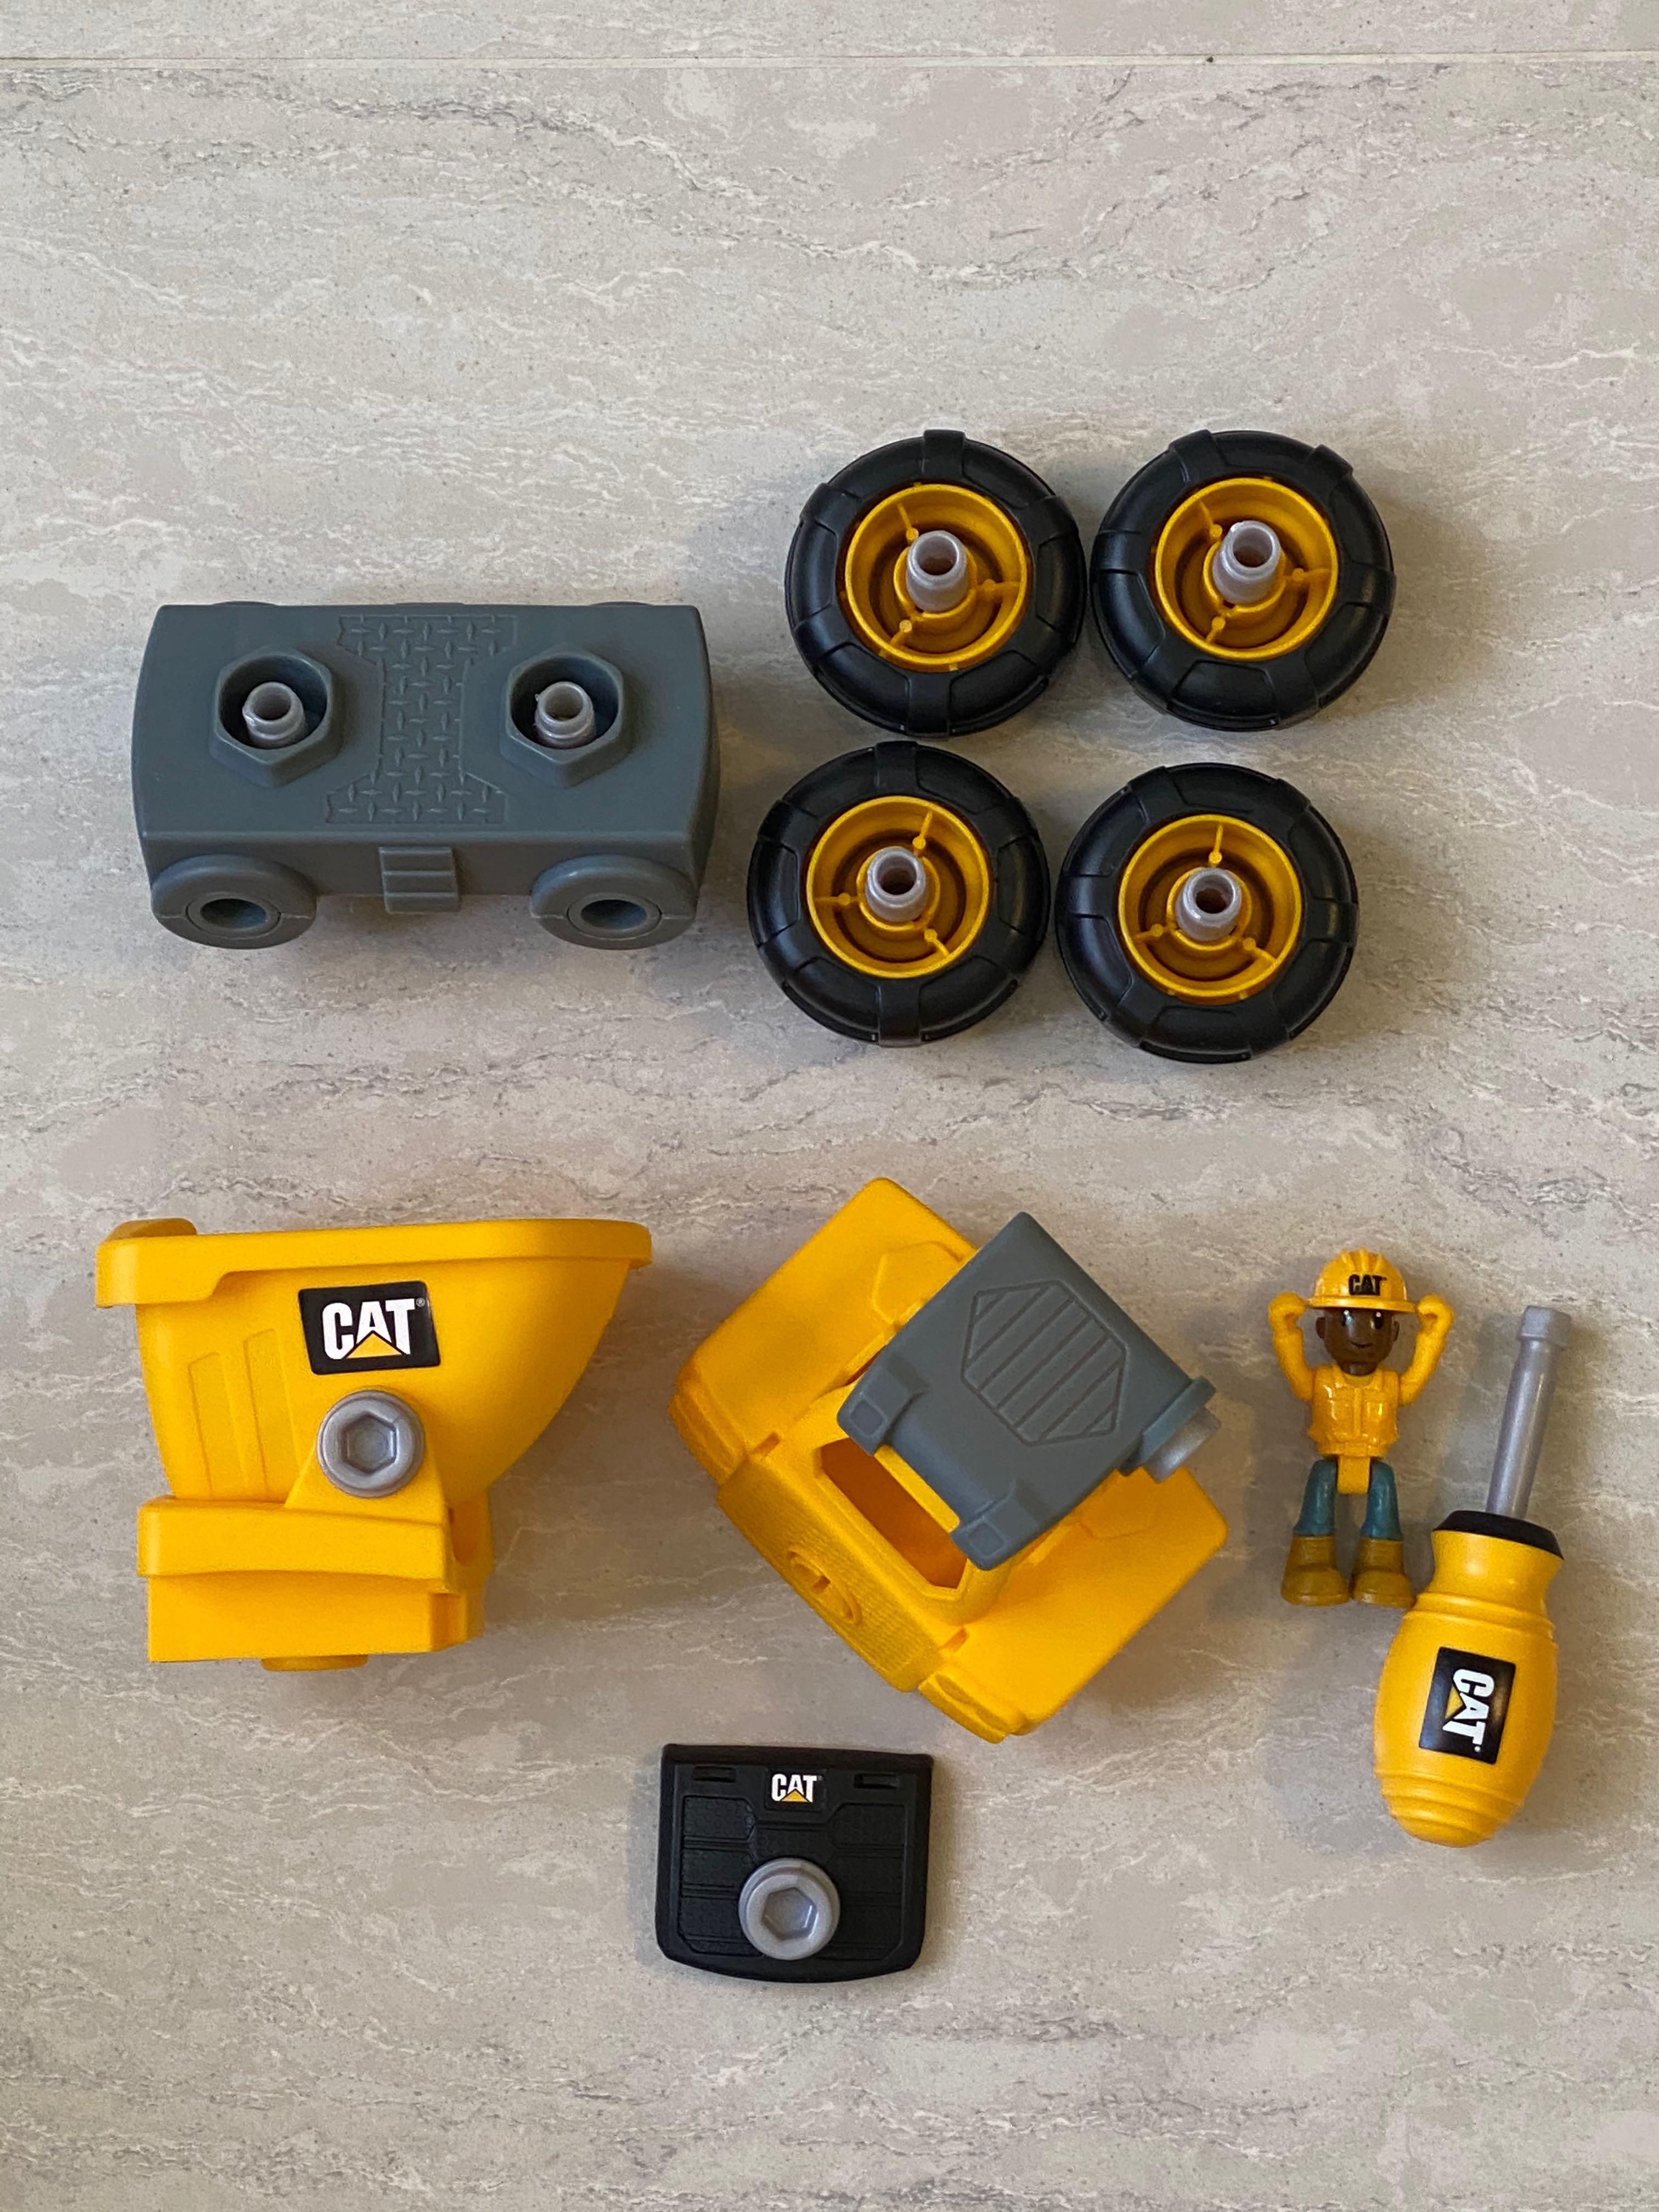 CAT toys - Build Your Own Dump Truck, 兒童＆孕婦用品, 嬰兒玩具